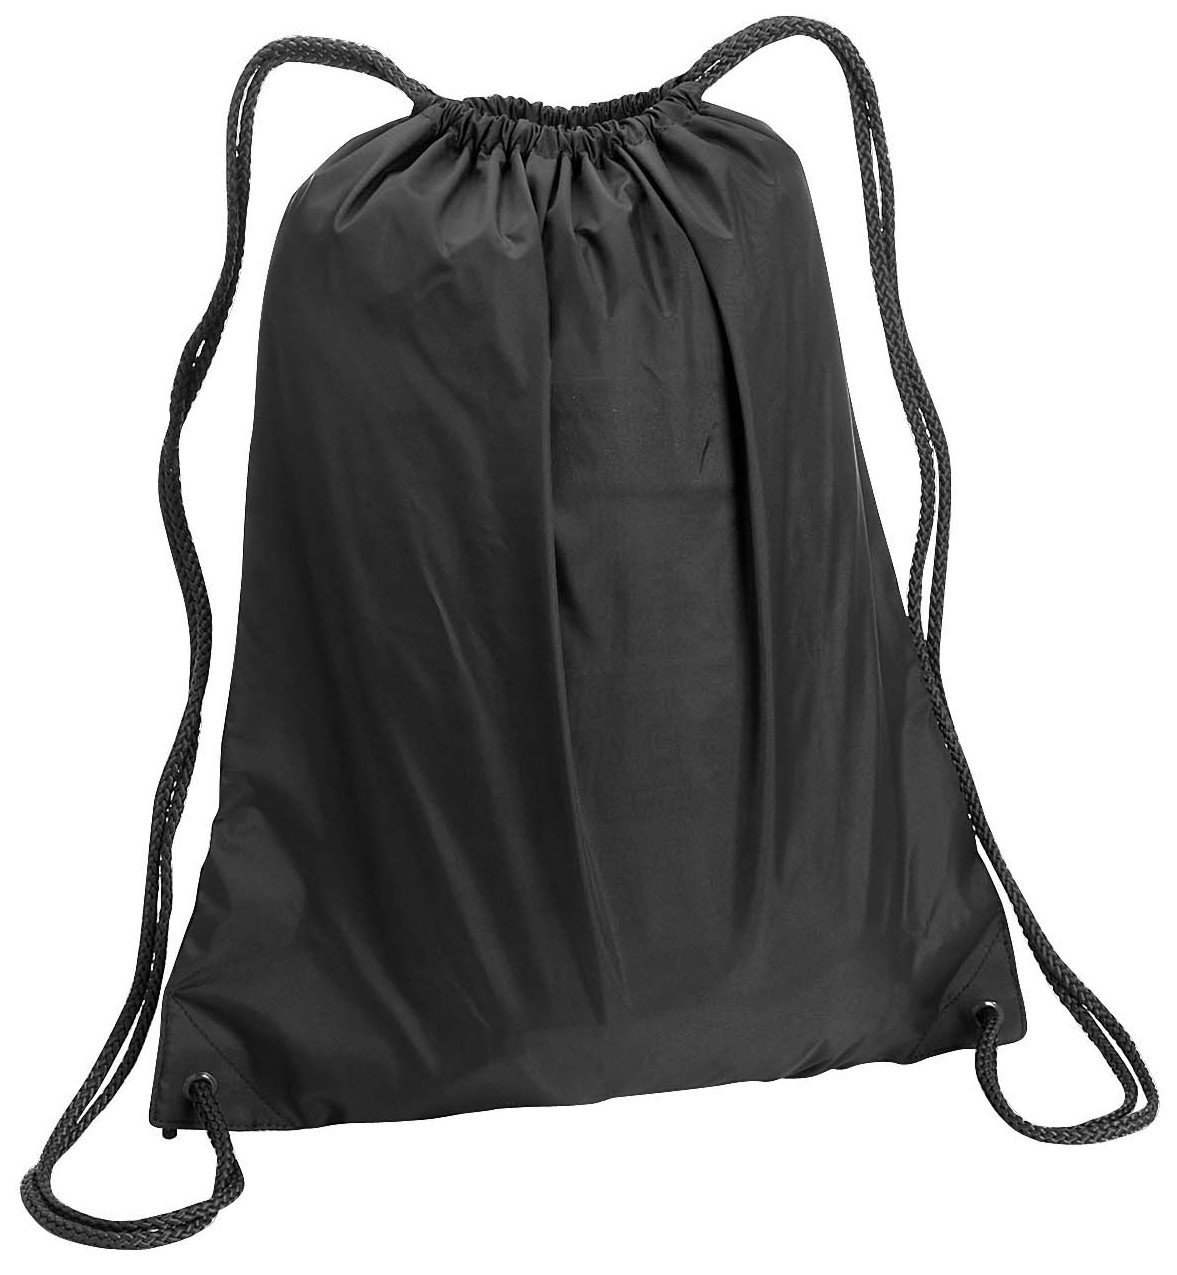 Liberty Bags Large Nylon Drawstring Backpack Best Offer Clothing, Shoes ...